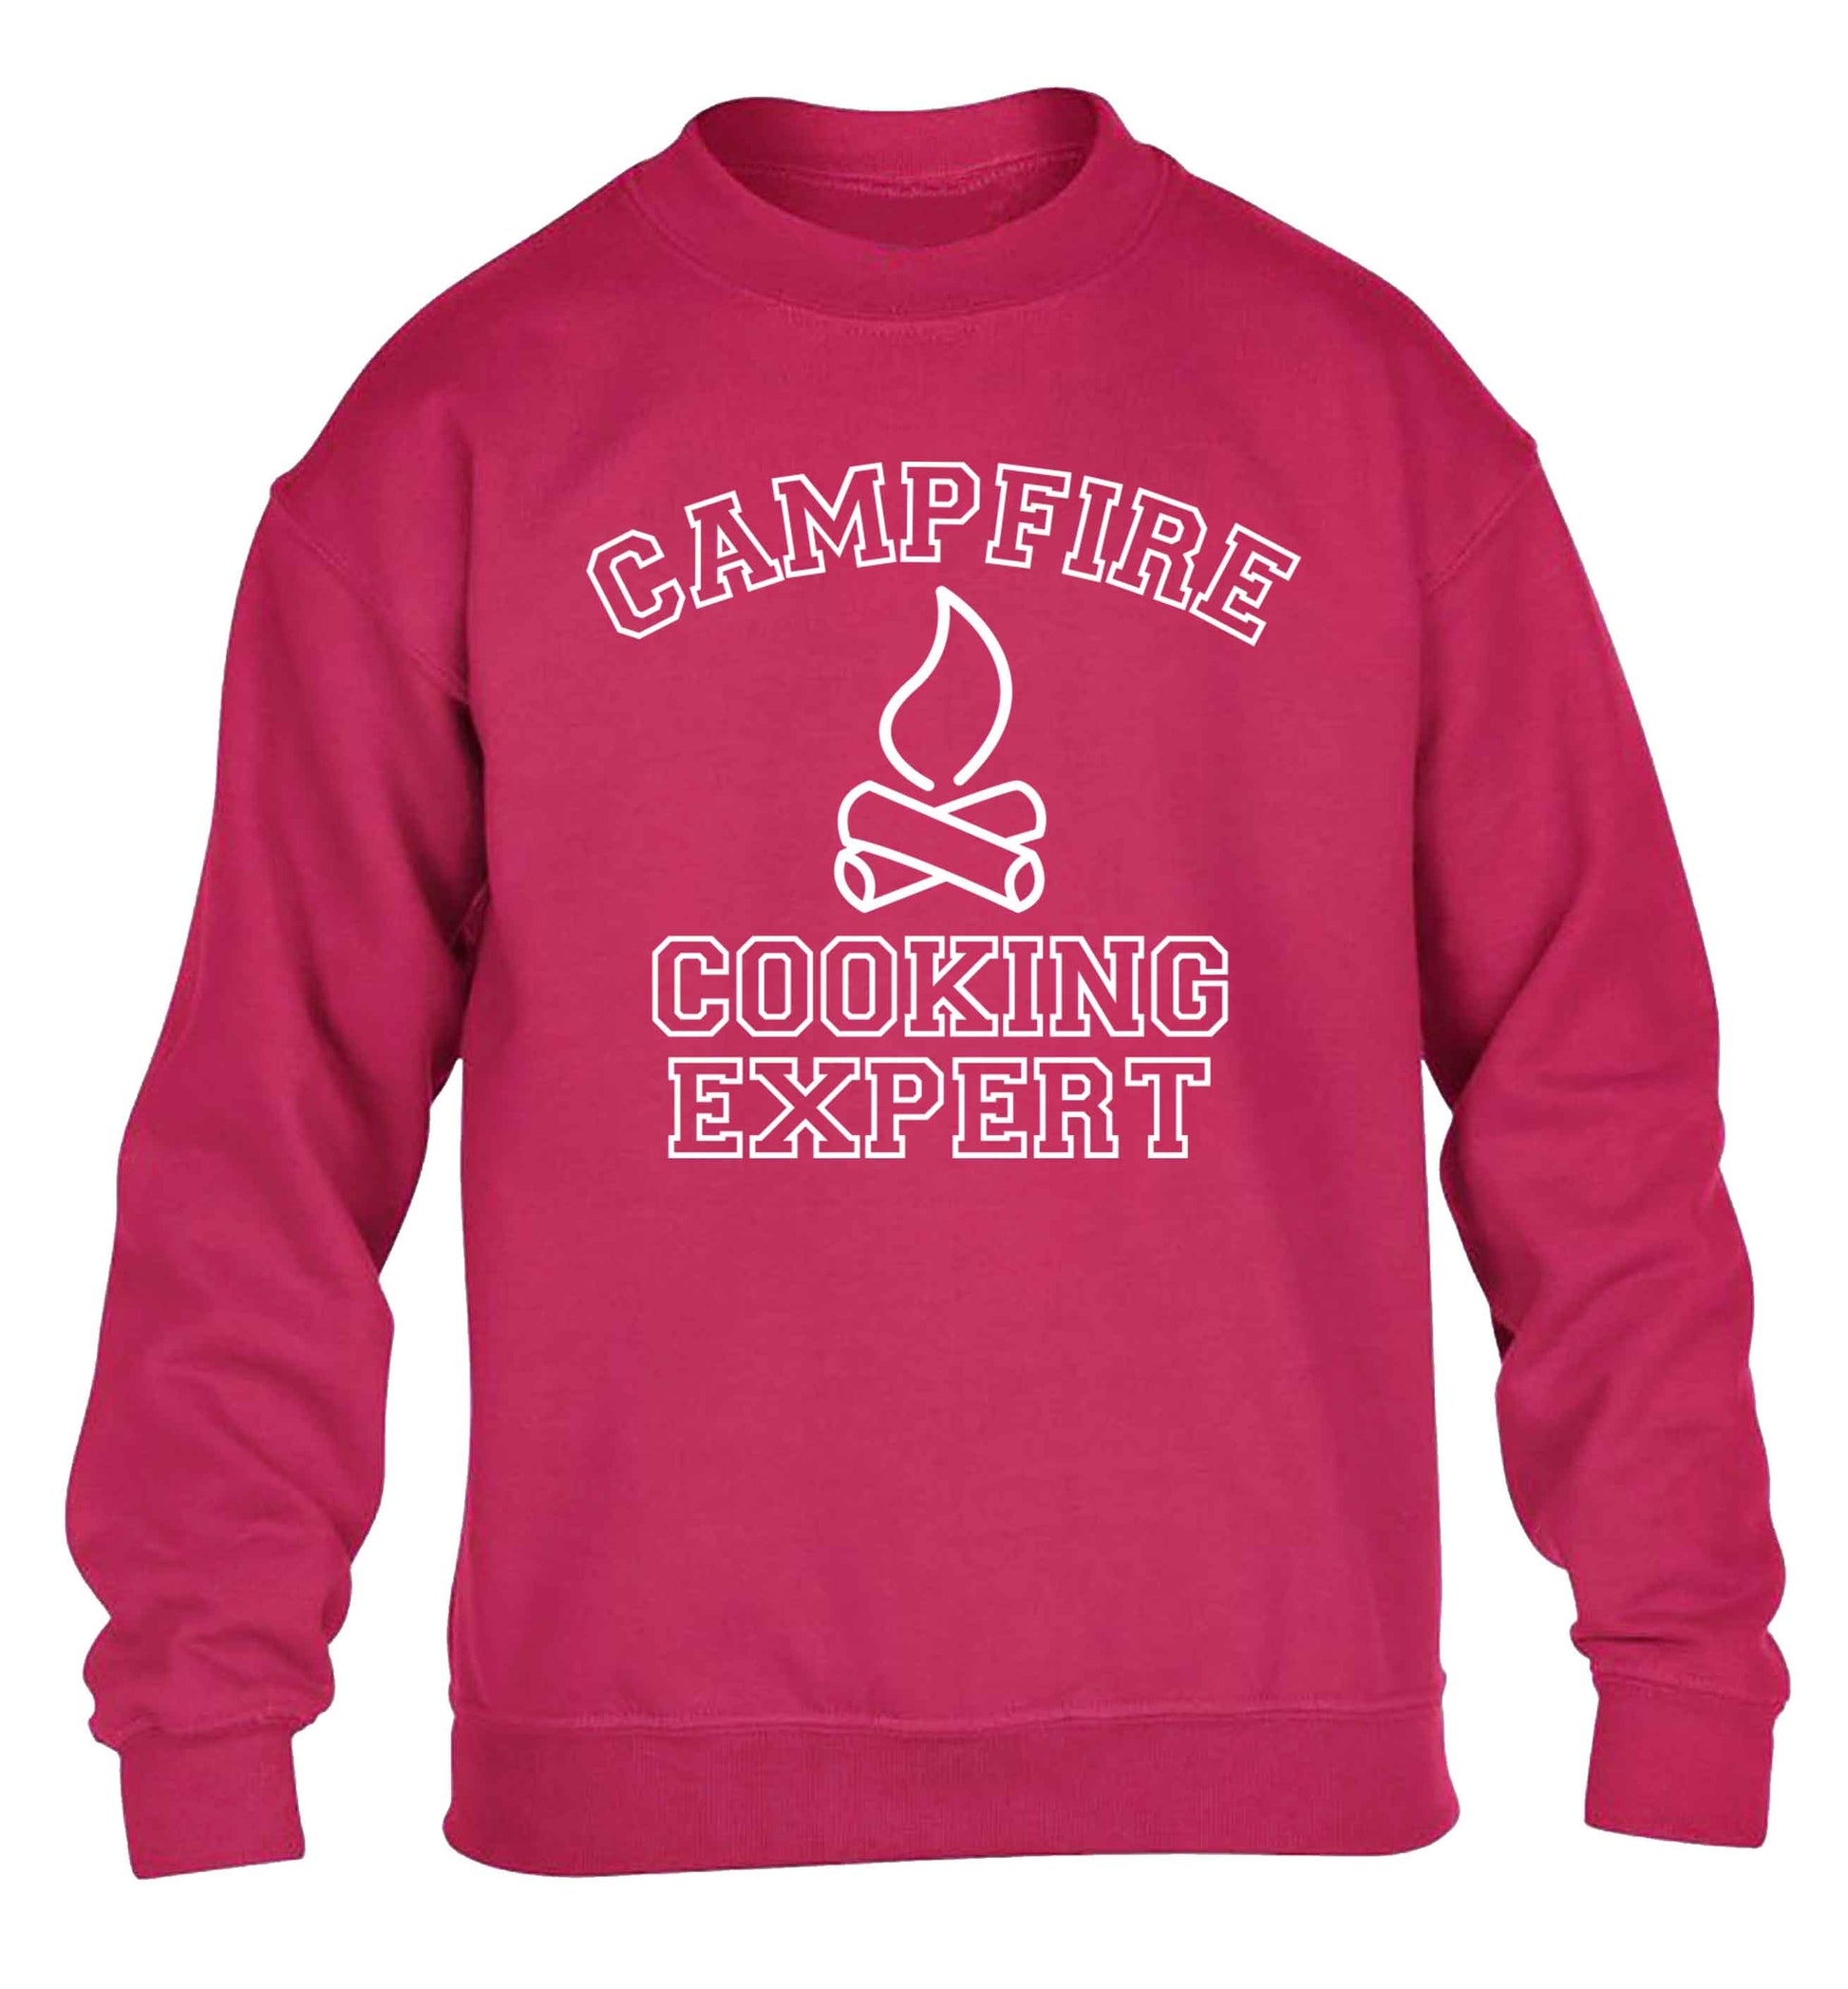 Campfire cooking expert children's pink sweater 12-13 Years